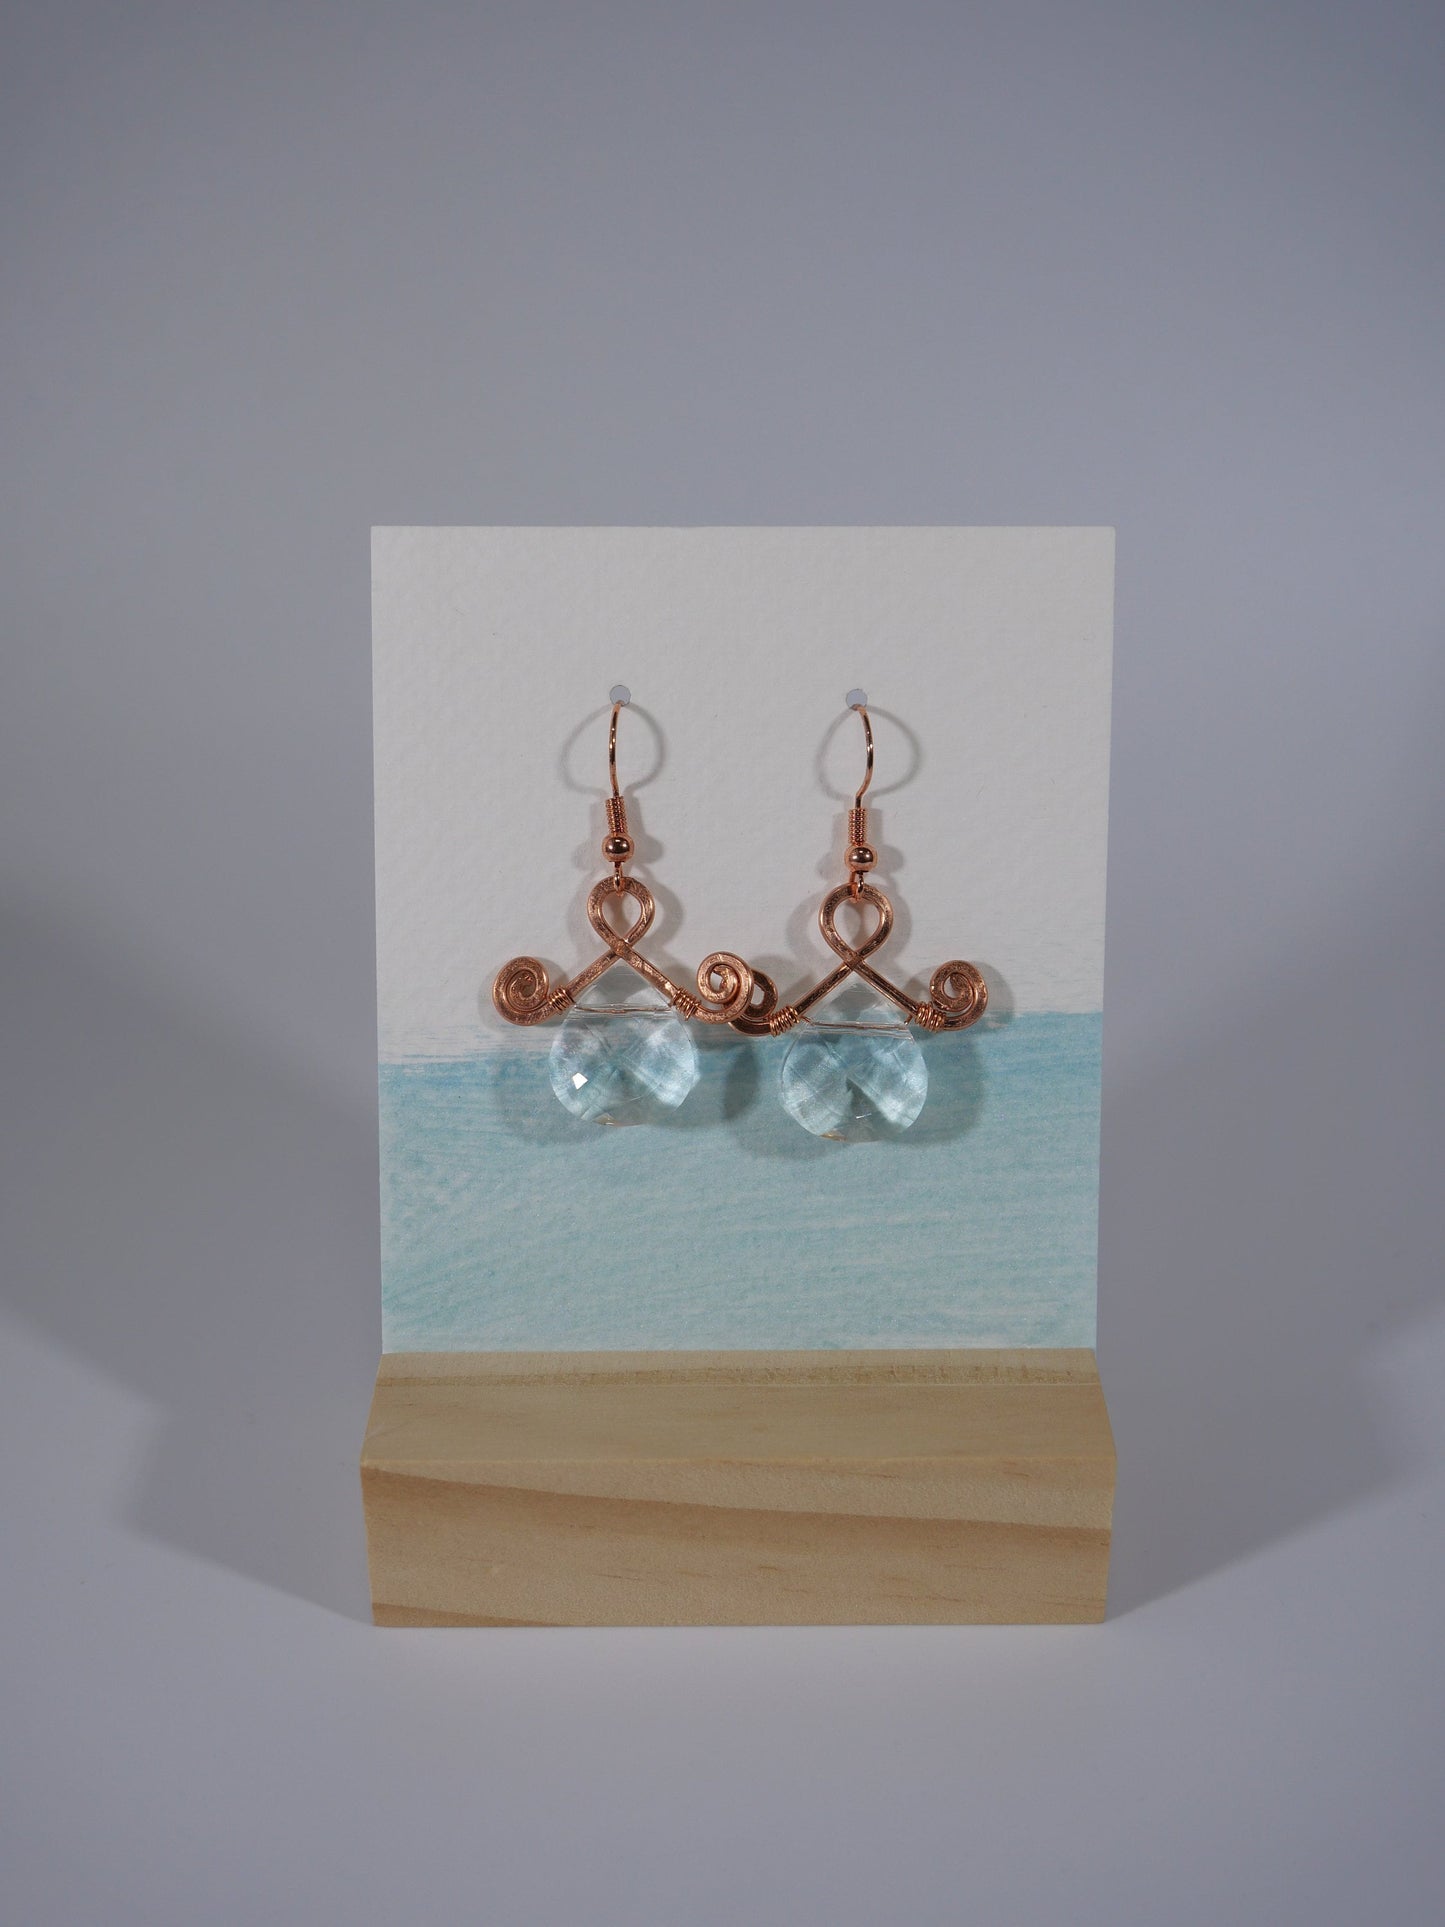 Copper and Crystal Glass bead earrings, Simple Copper Earrings, Hand Made Earrings. Made in Maine